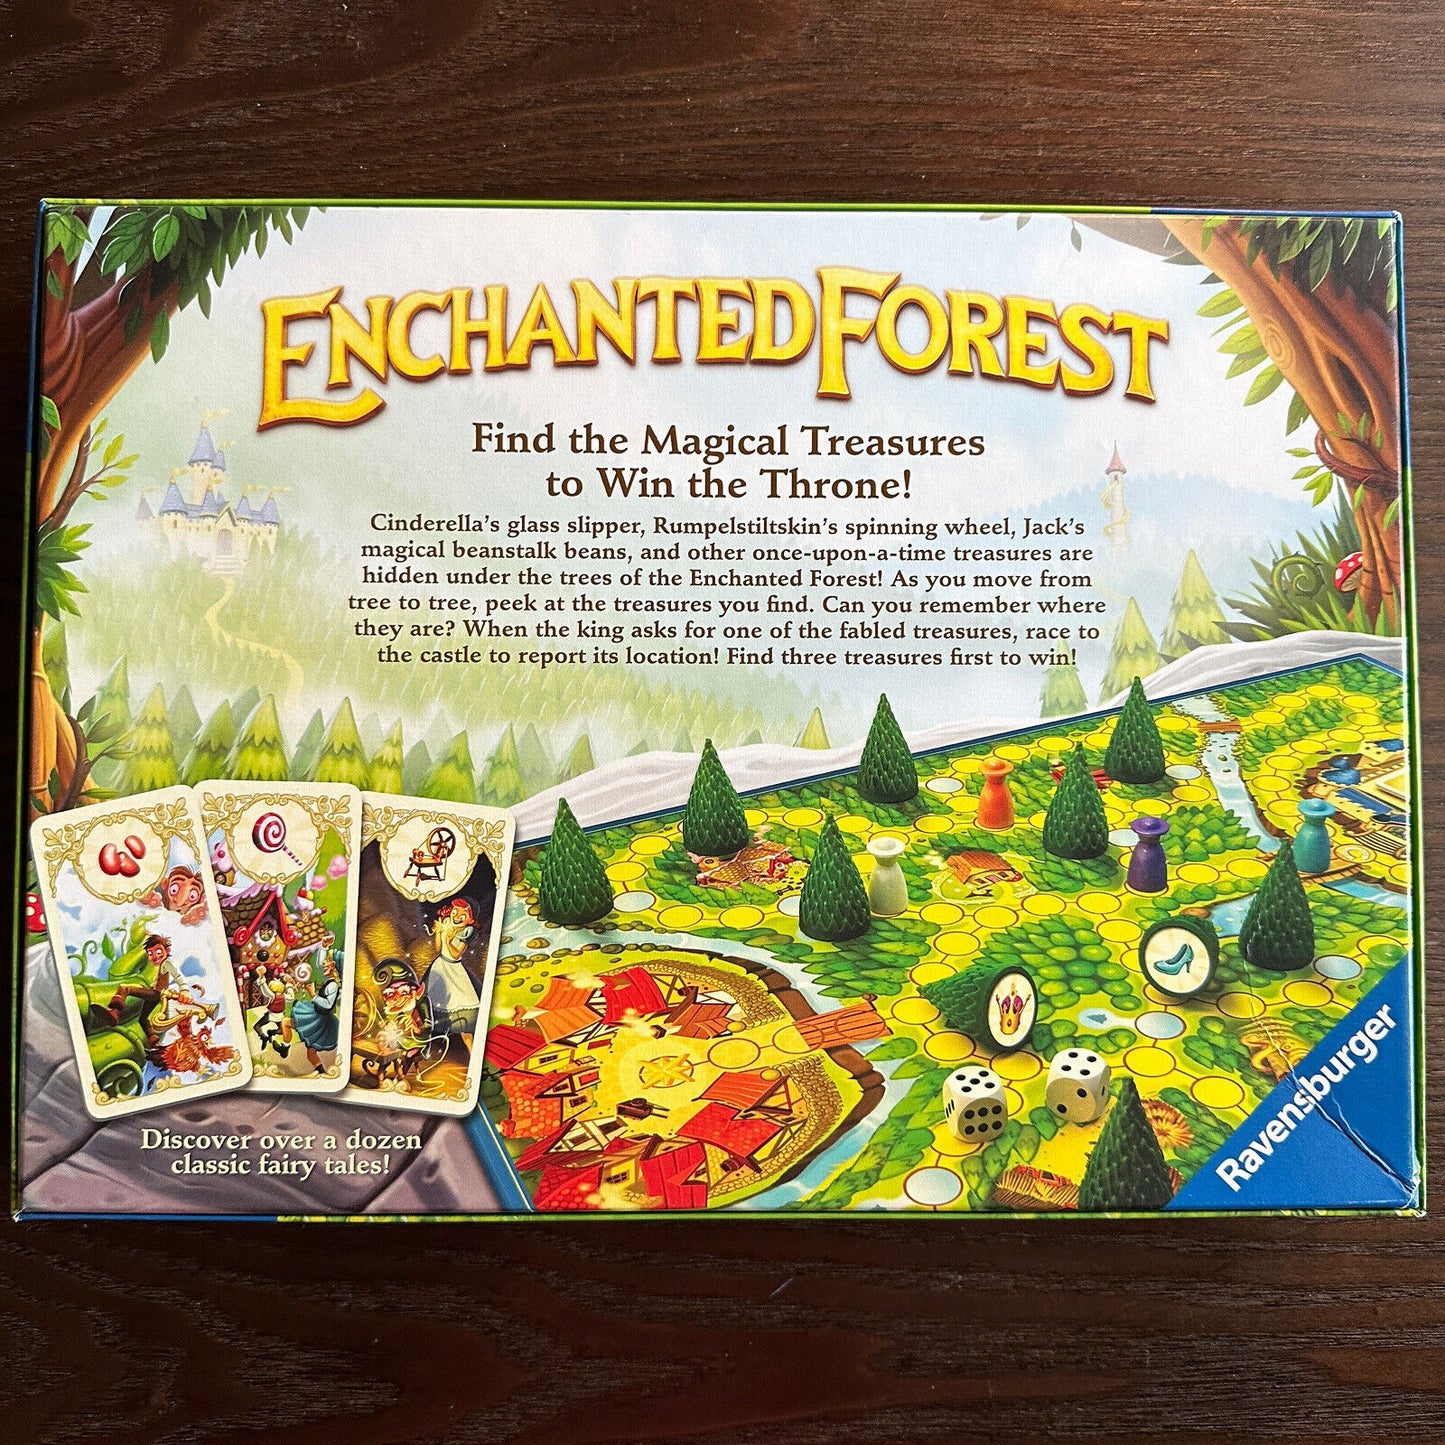 Ravensburger Enchanted Forest Board Game Fairy Tales Treasure Hunt Family Fun